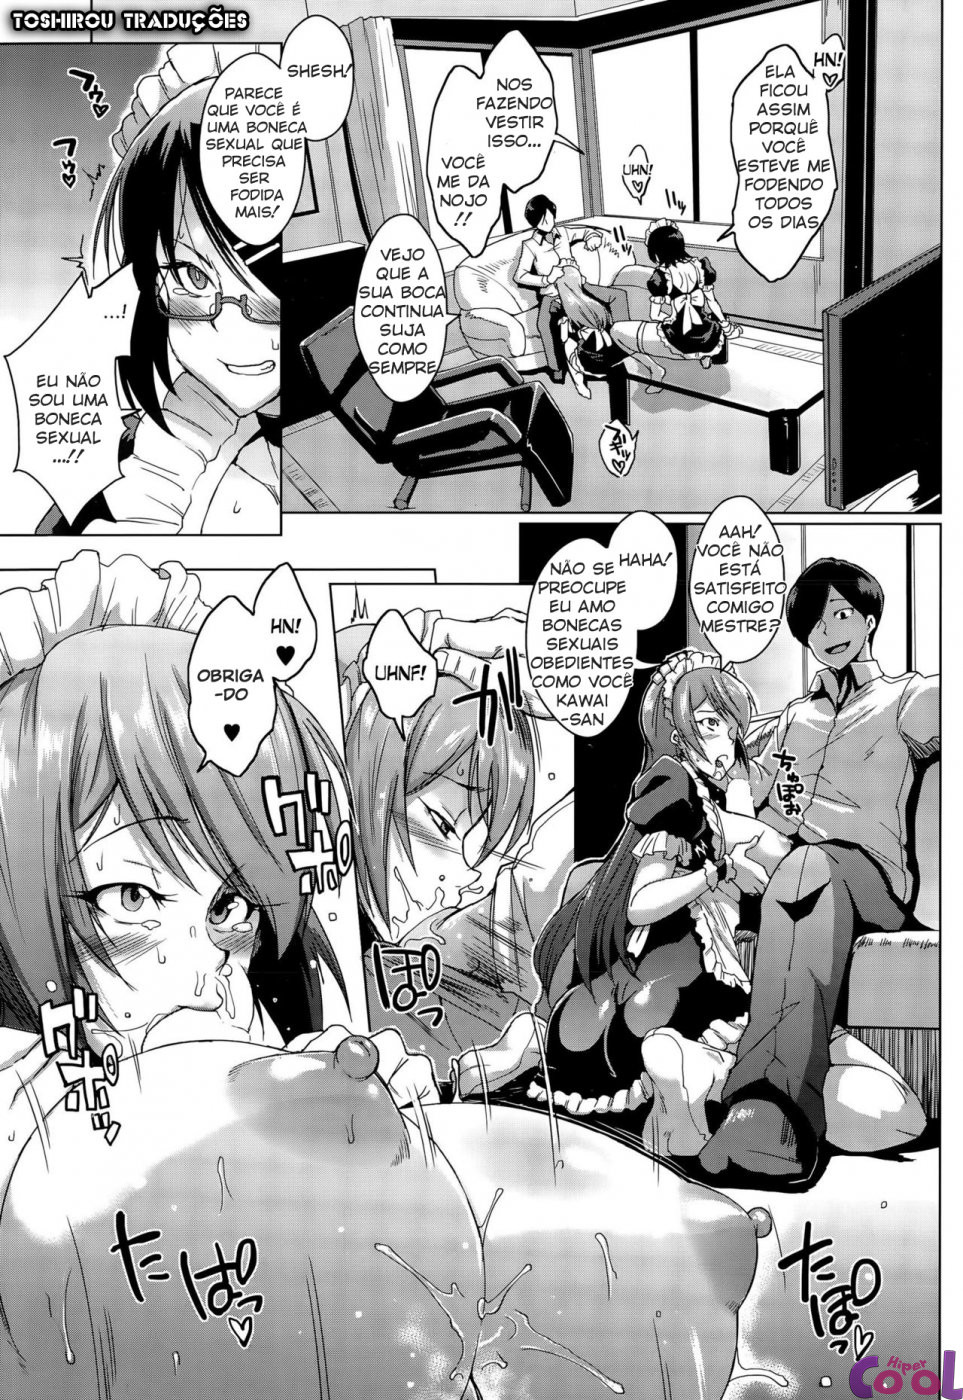 dolls-chapter-02-page-05.jpg